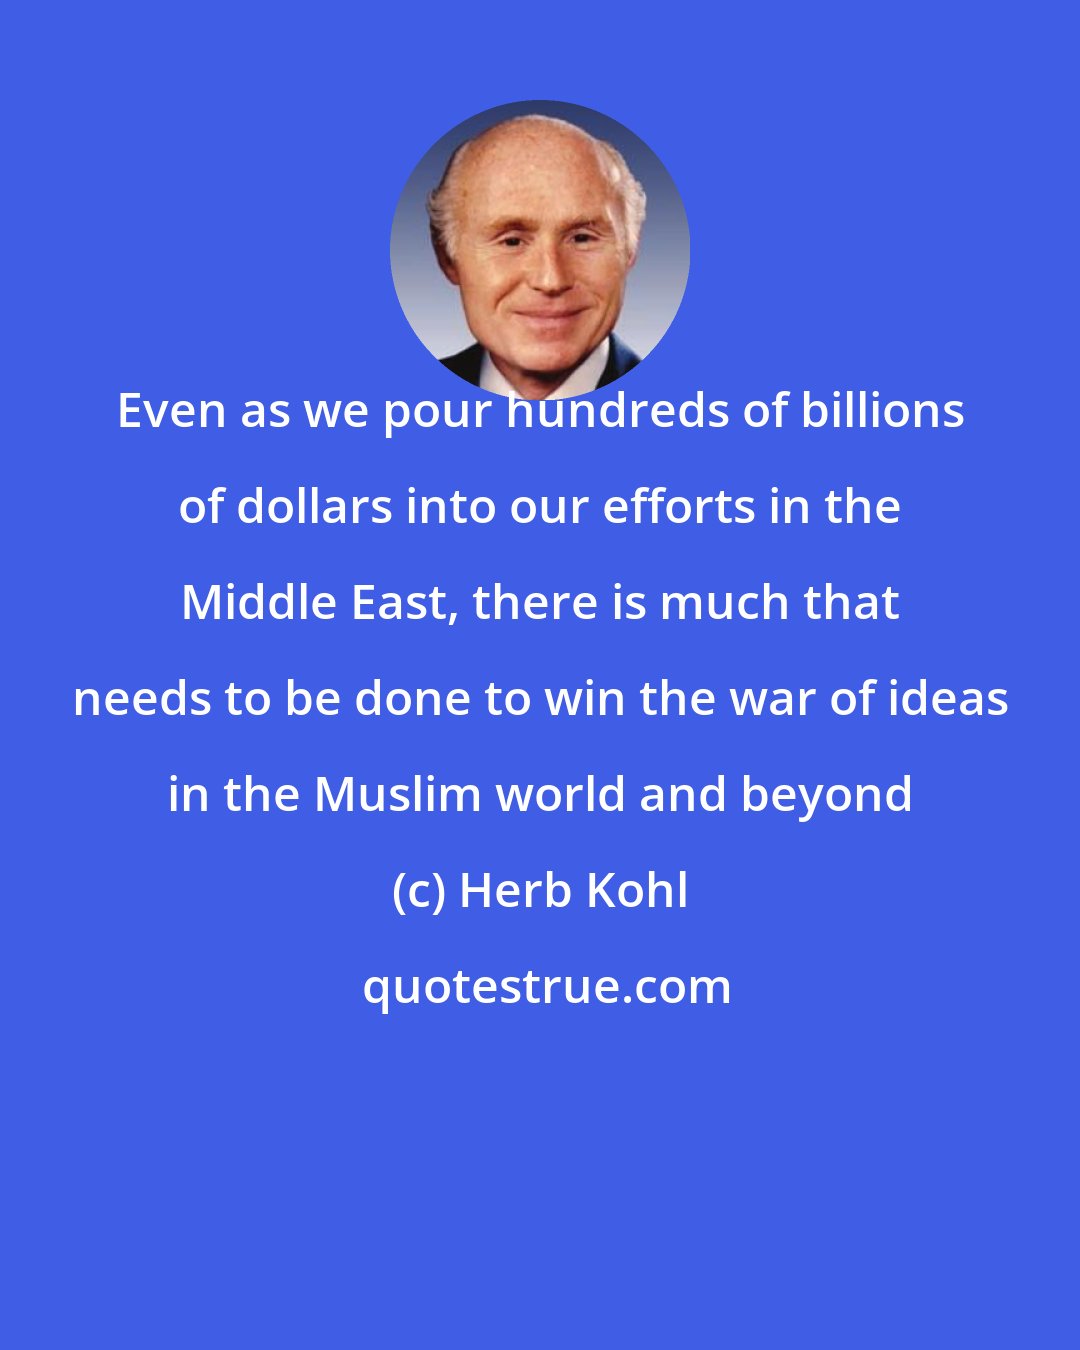 Herb Kohl: Even as we pour hundreds of billions of dollars into our efforts in the Middle East, there is much that needs to be done to win the war of ideas in the Muslim world and beyond